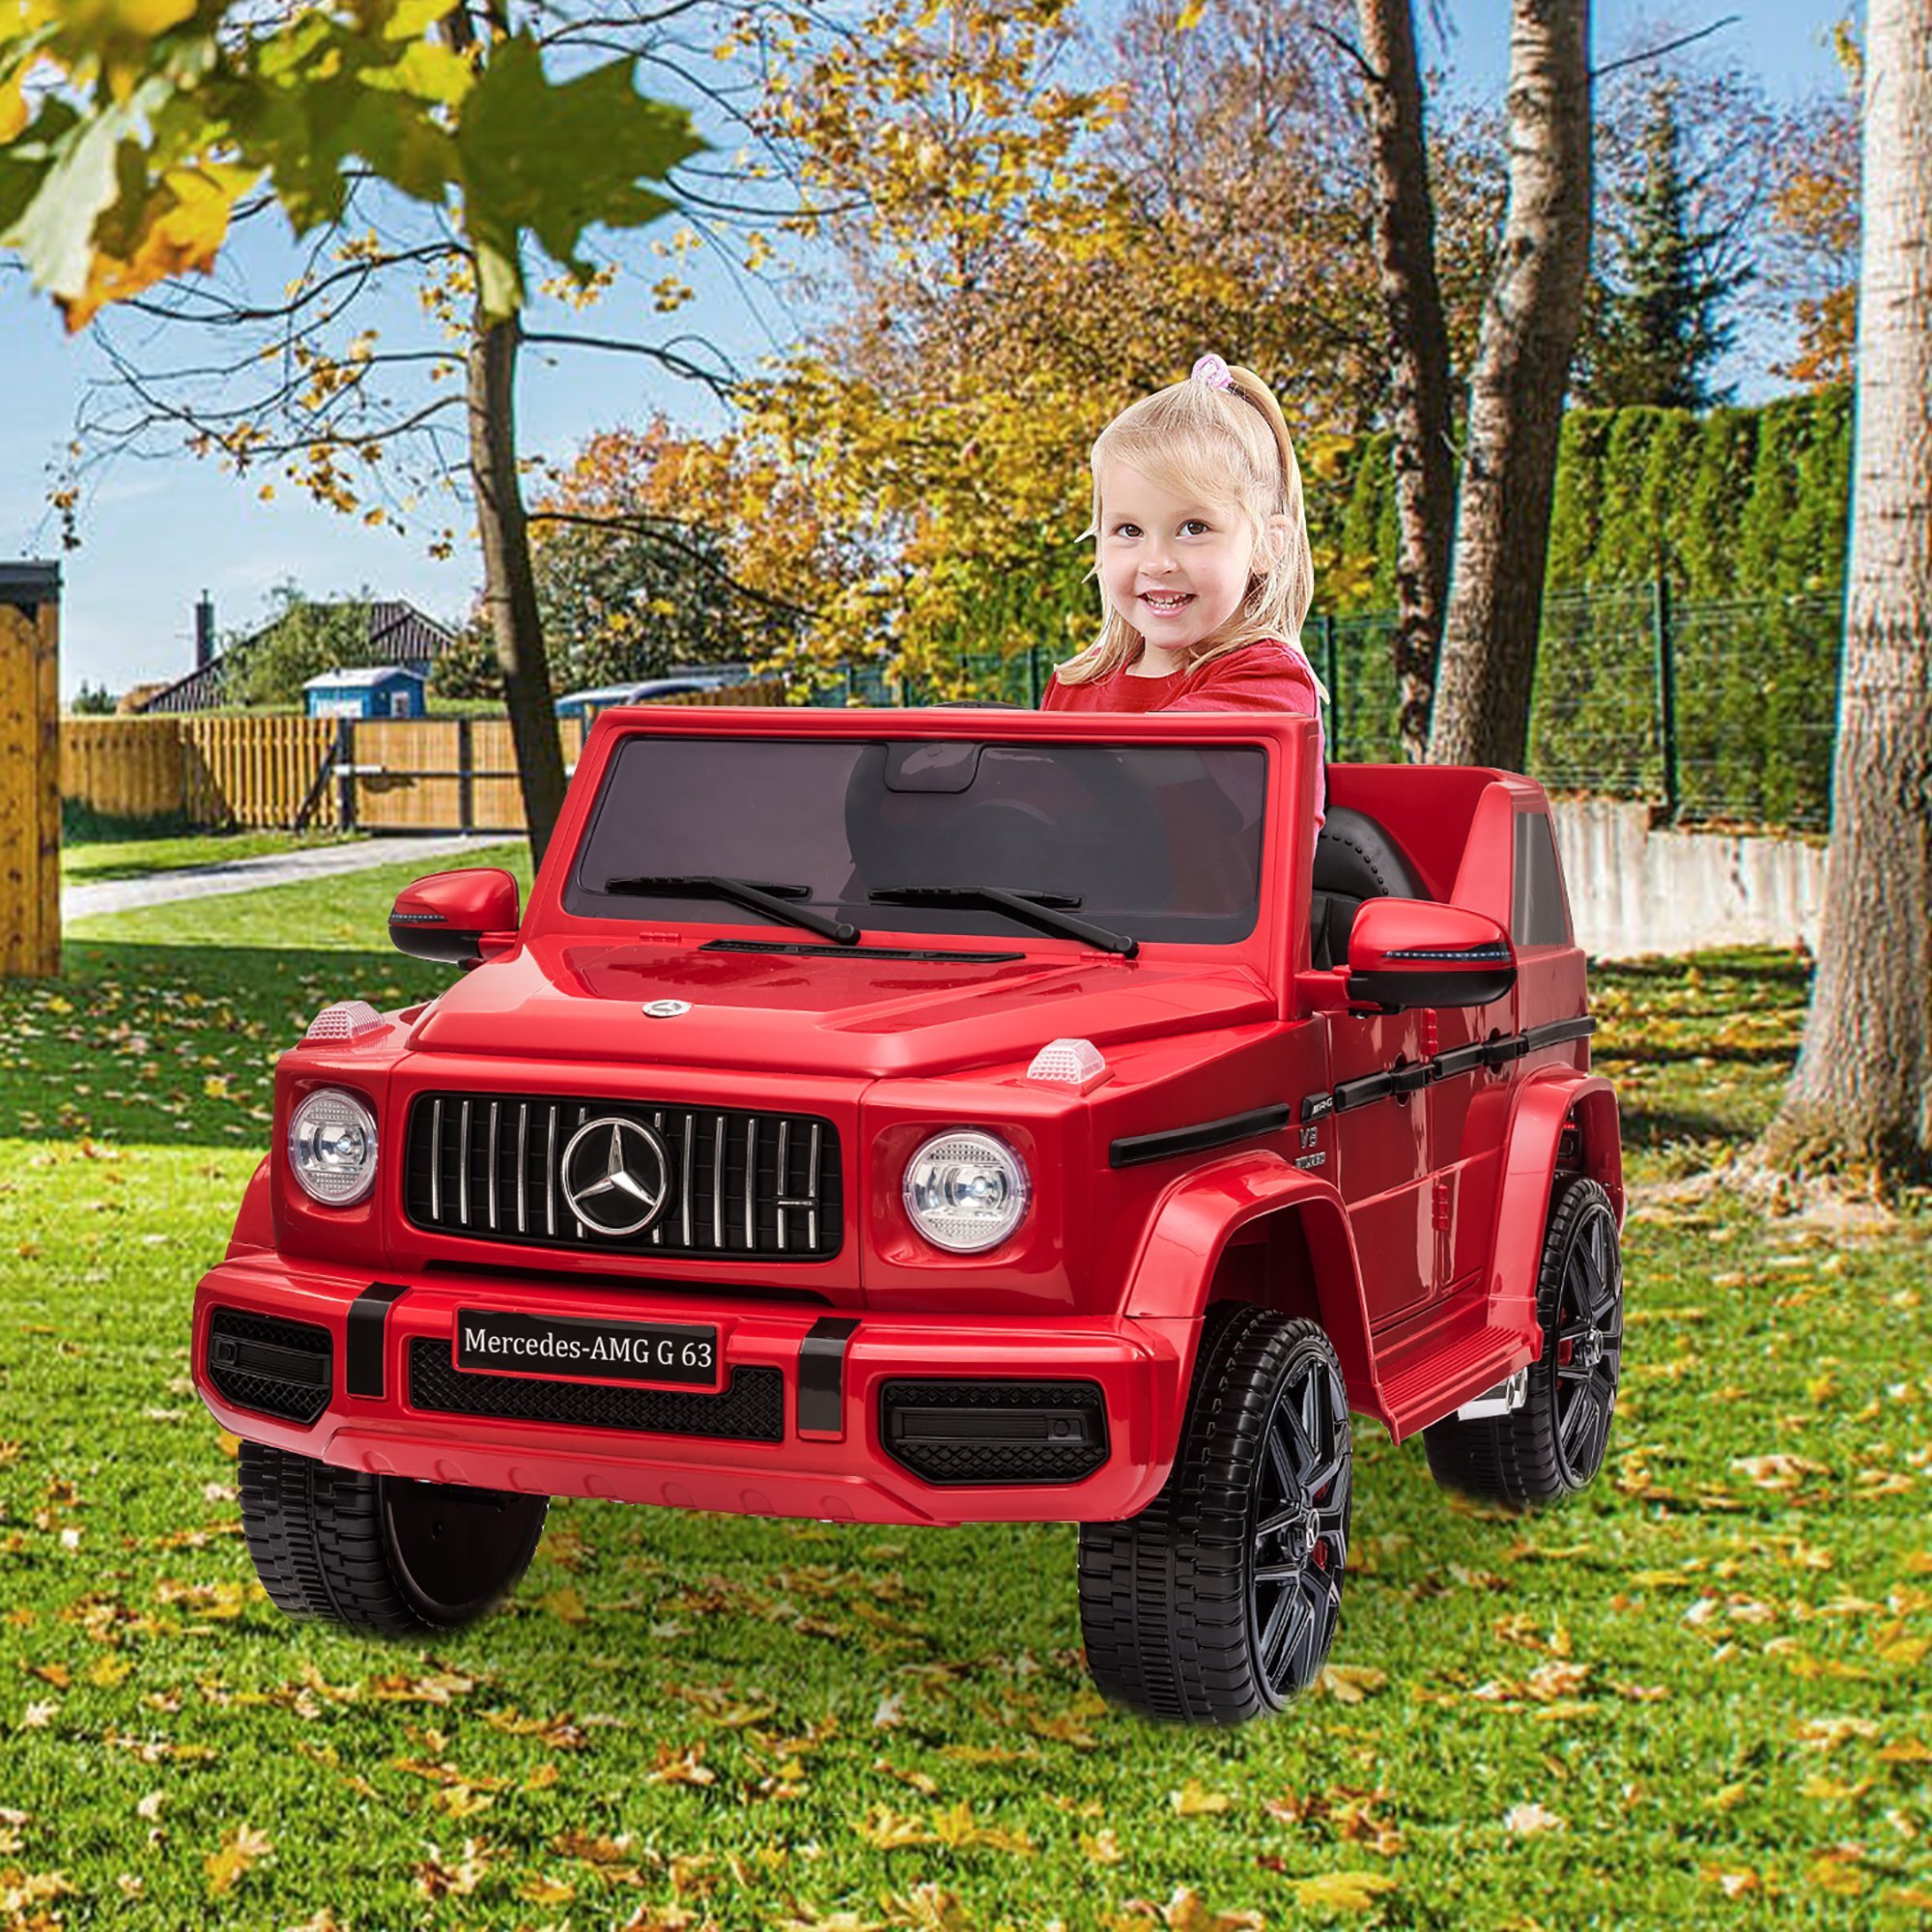 Licensed Mercedes Benz AMG G63 Ride on Car Vehicle Toy Gift for Kids w/ Music US 